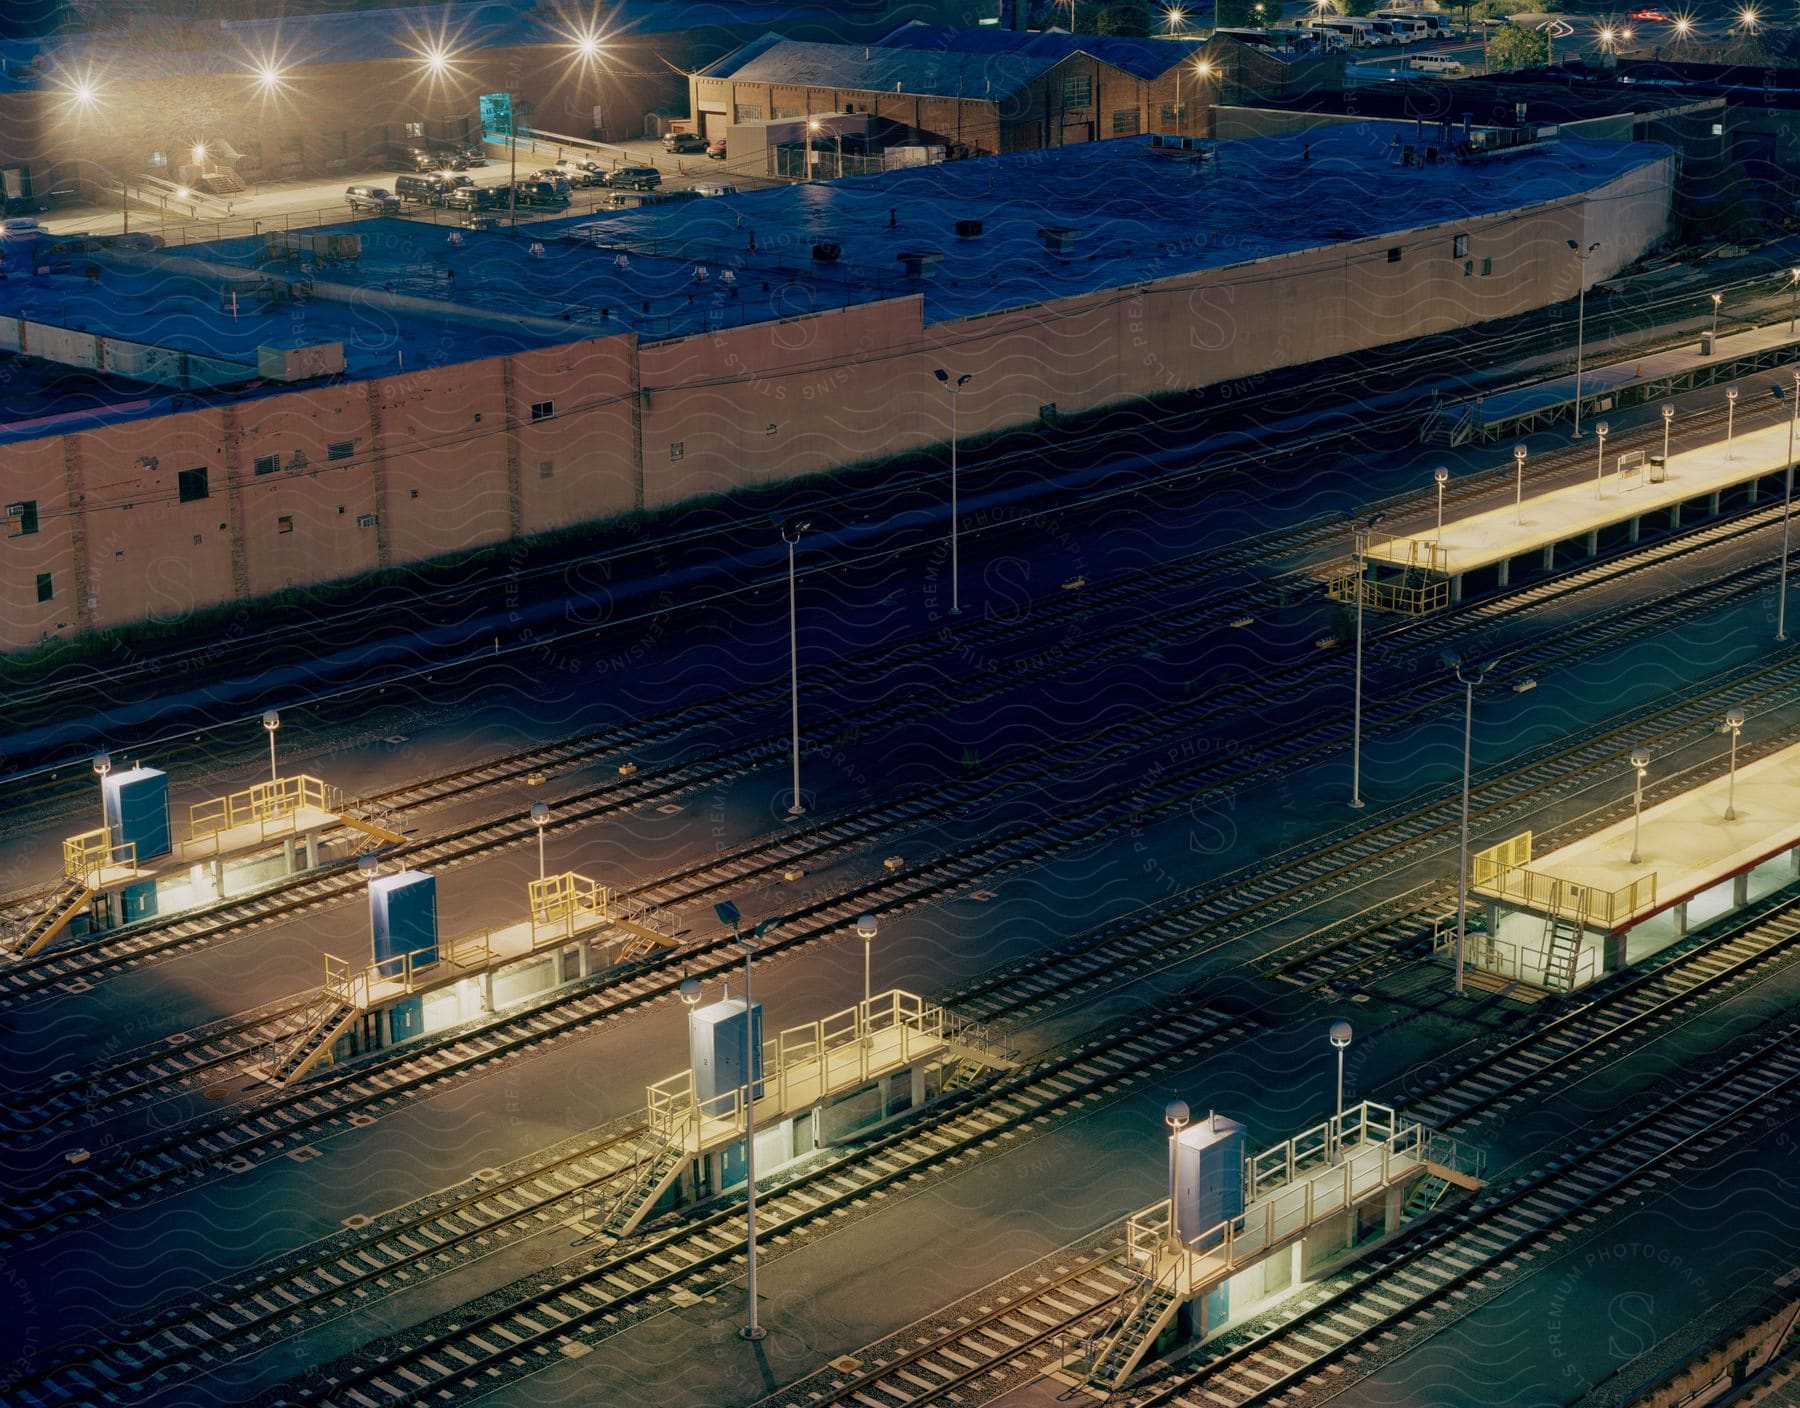 A railroad yard with docking stations for organizing and preparing trains for various operations